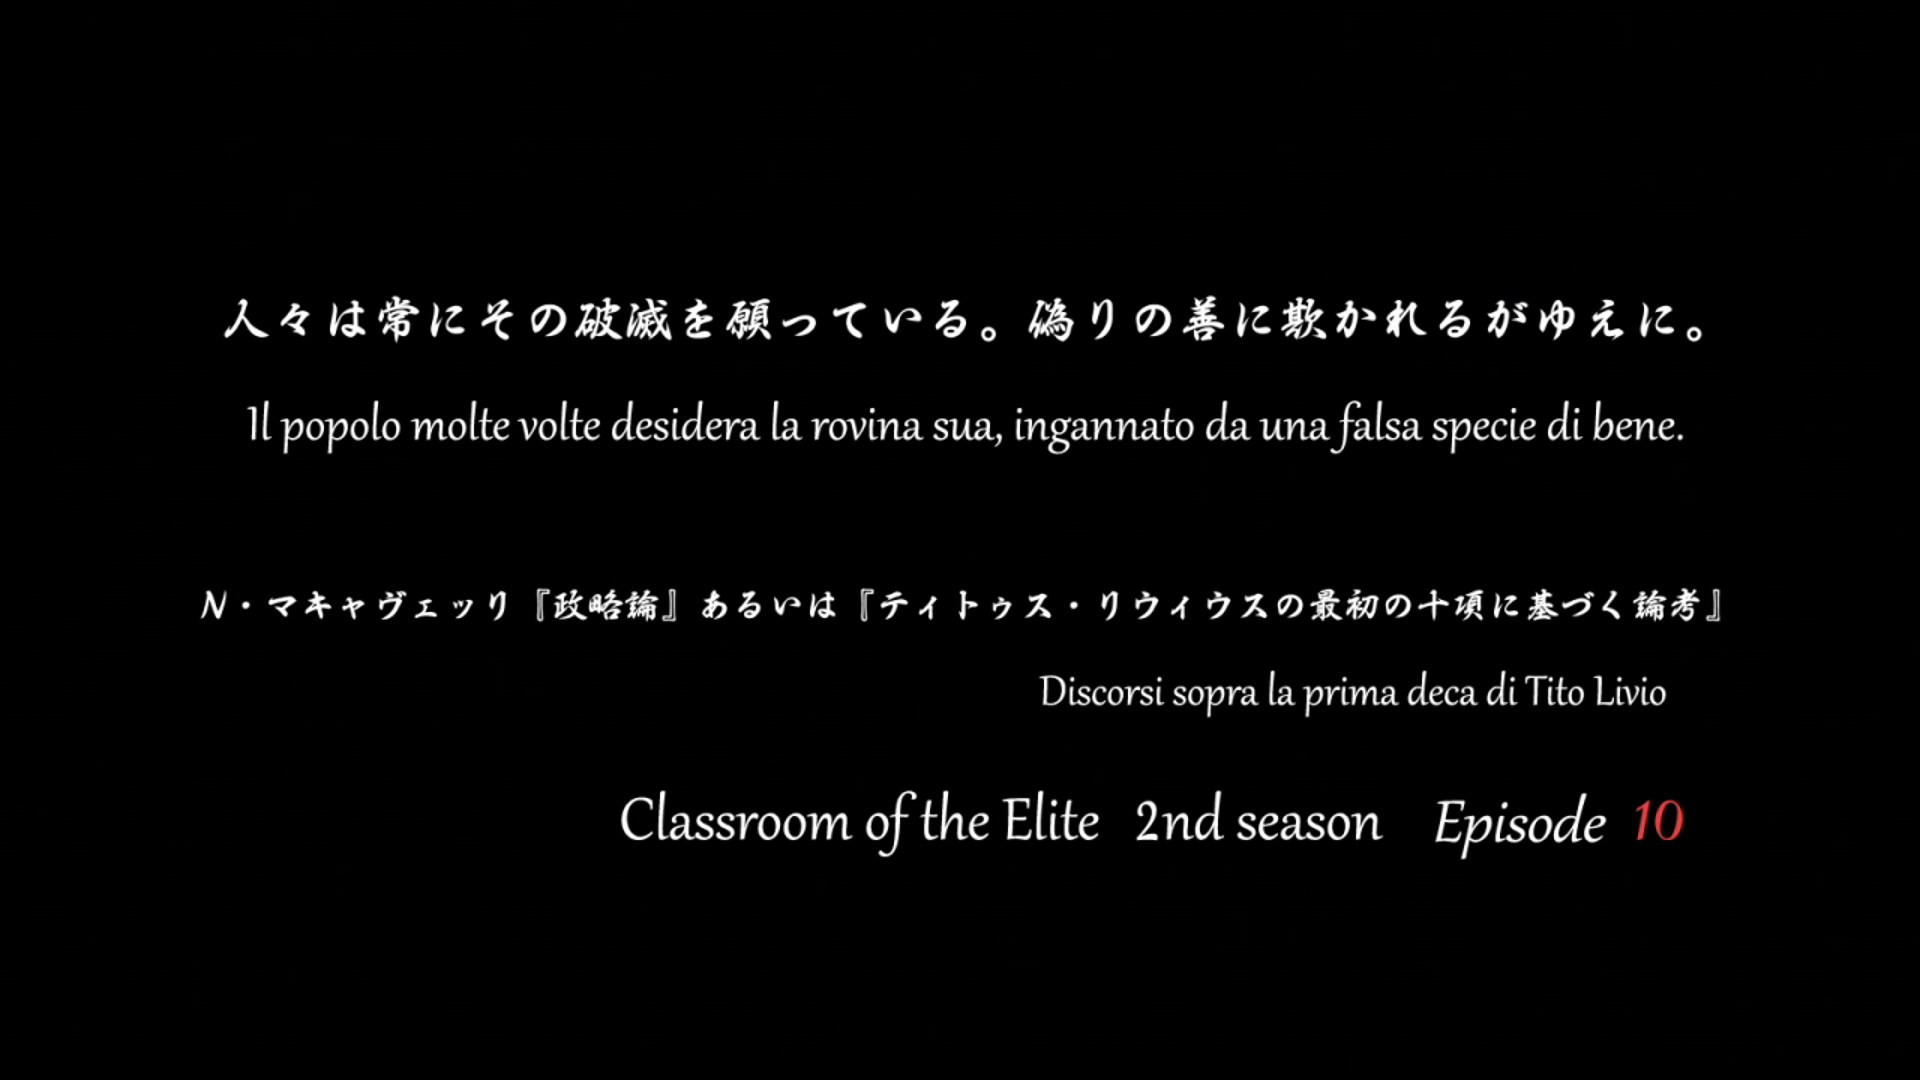 Watch Classroom of the Elite Season 2 Episode 10 - People, often deceived  by an illusive good, desire their own ruin. Online Now